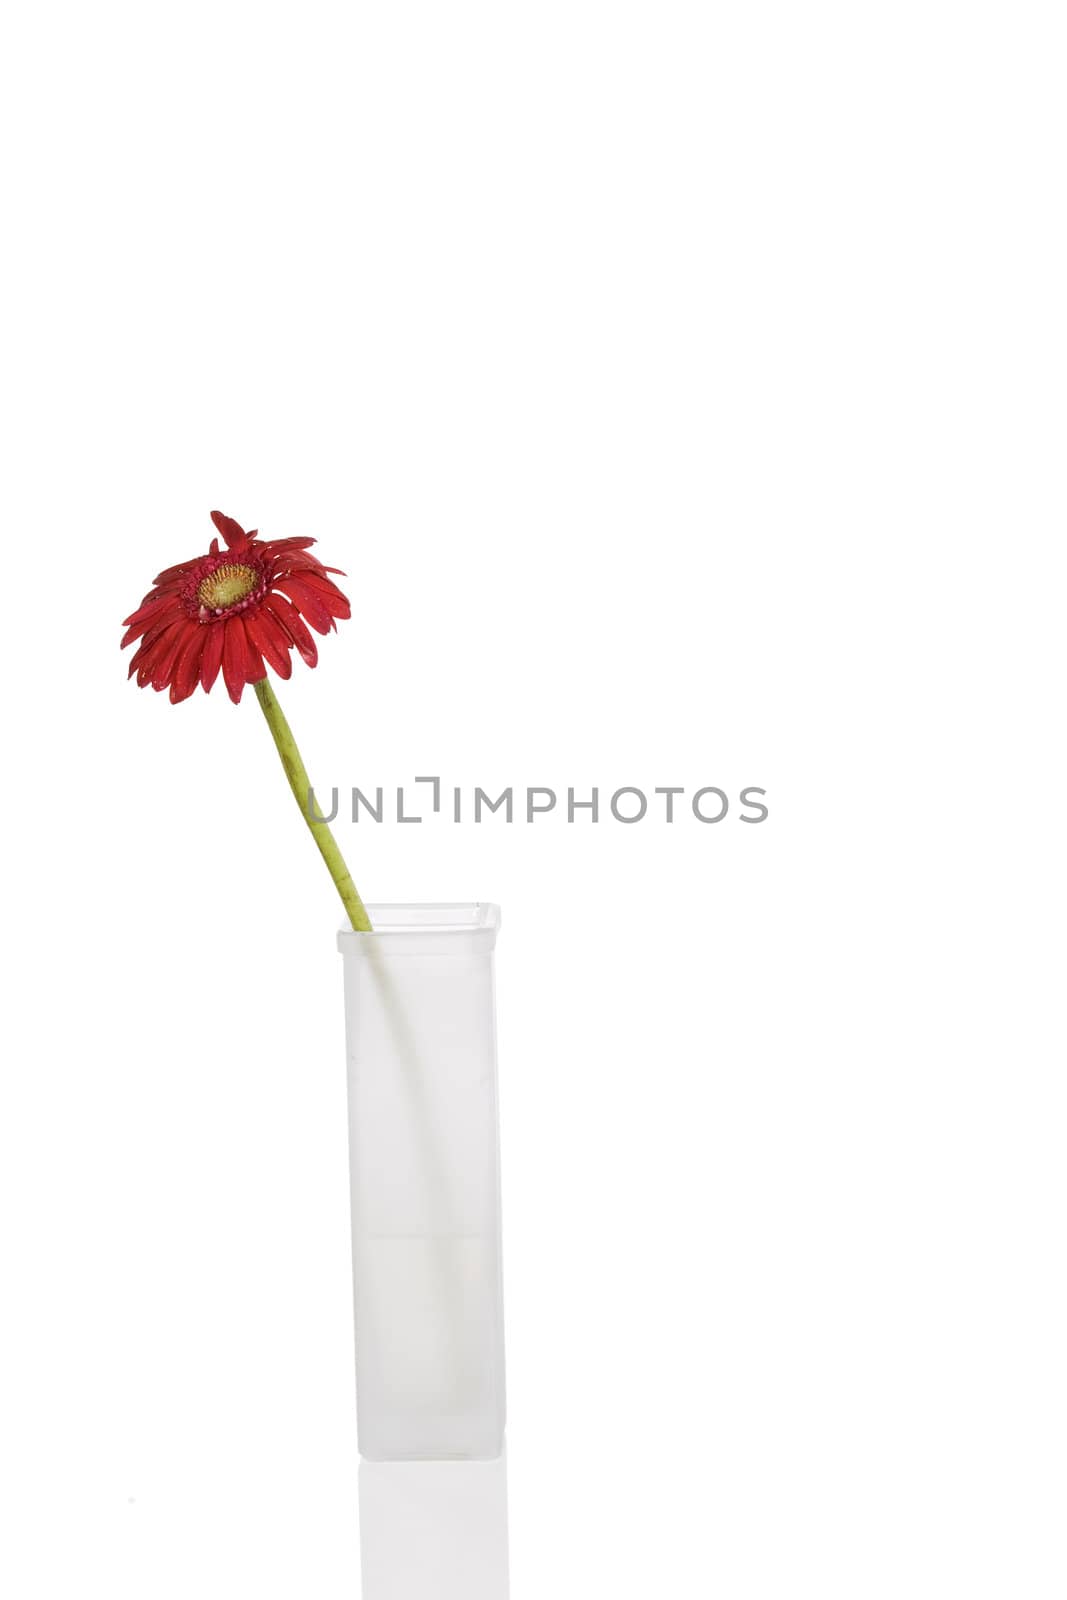 Beautiful red gerbera daisy in white vase isolated by jarenwicklund